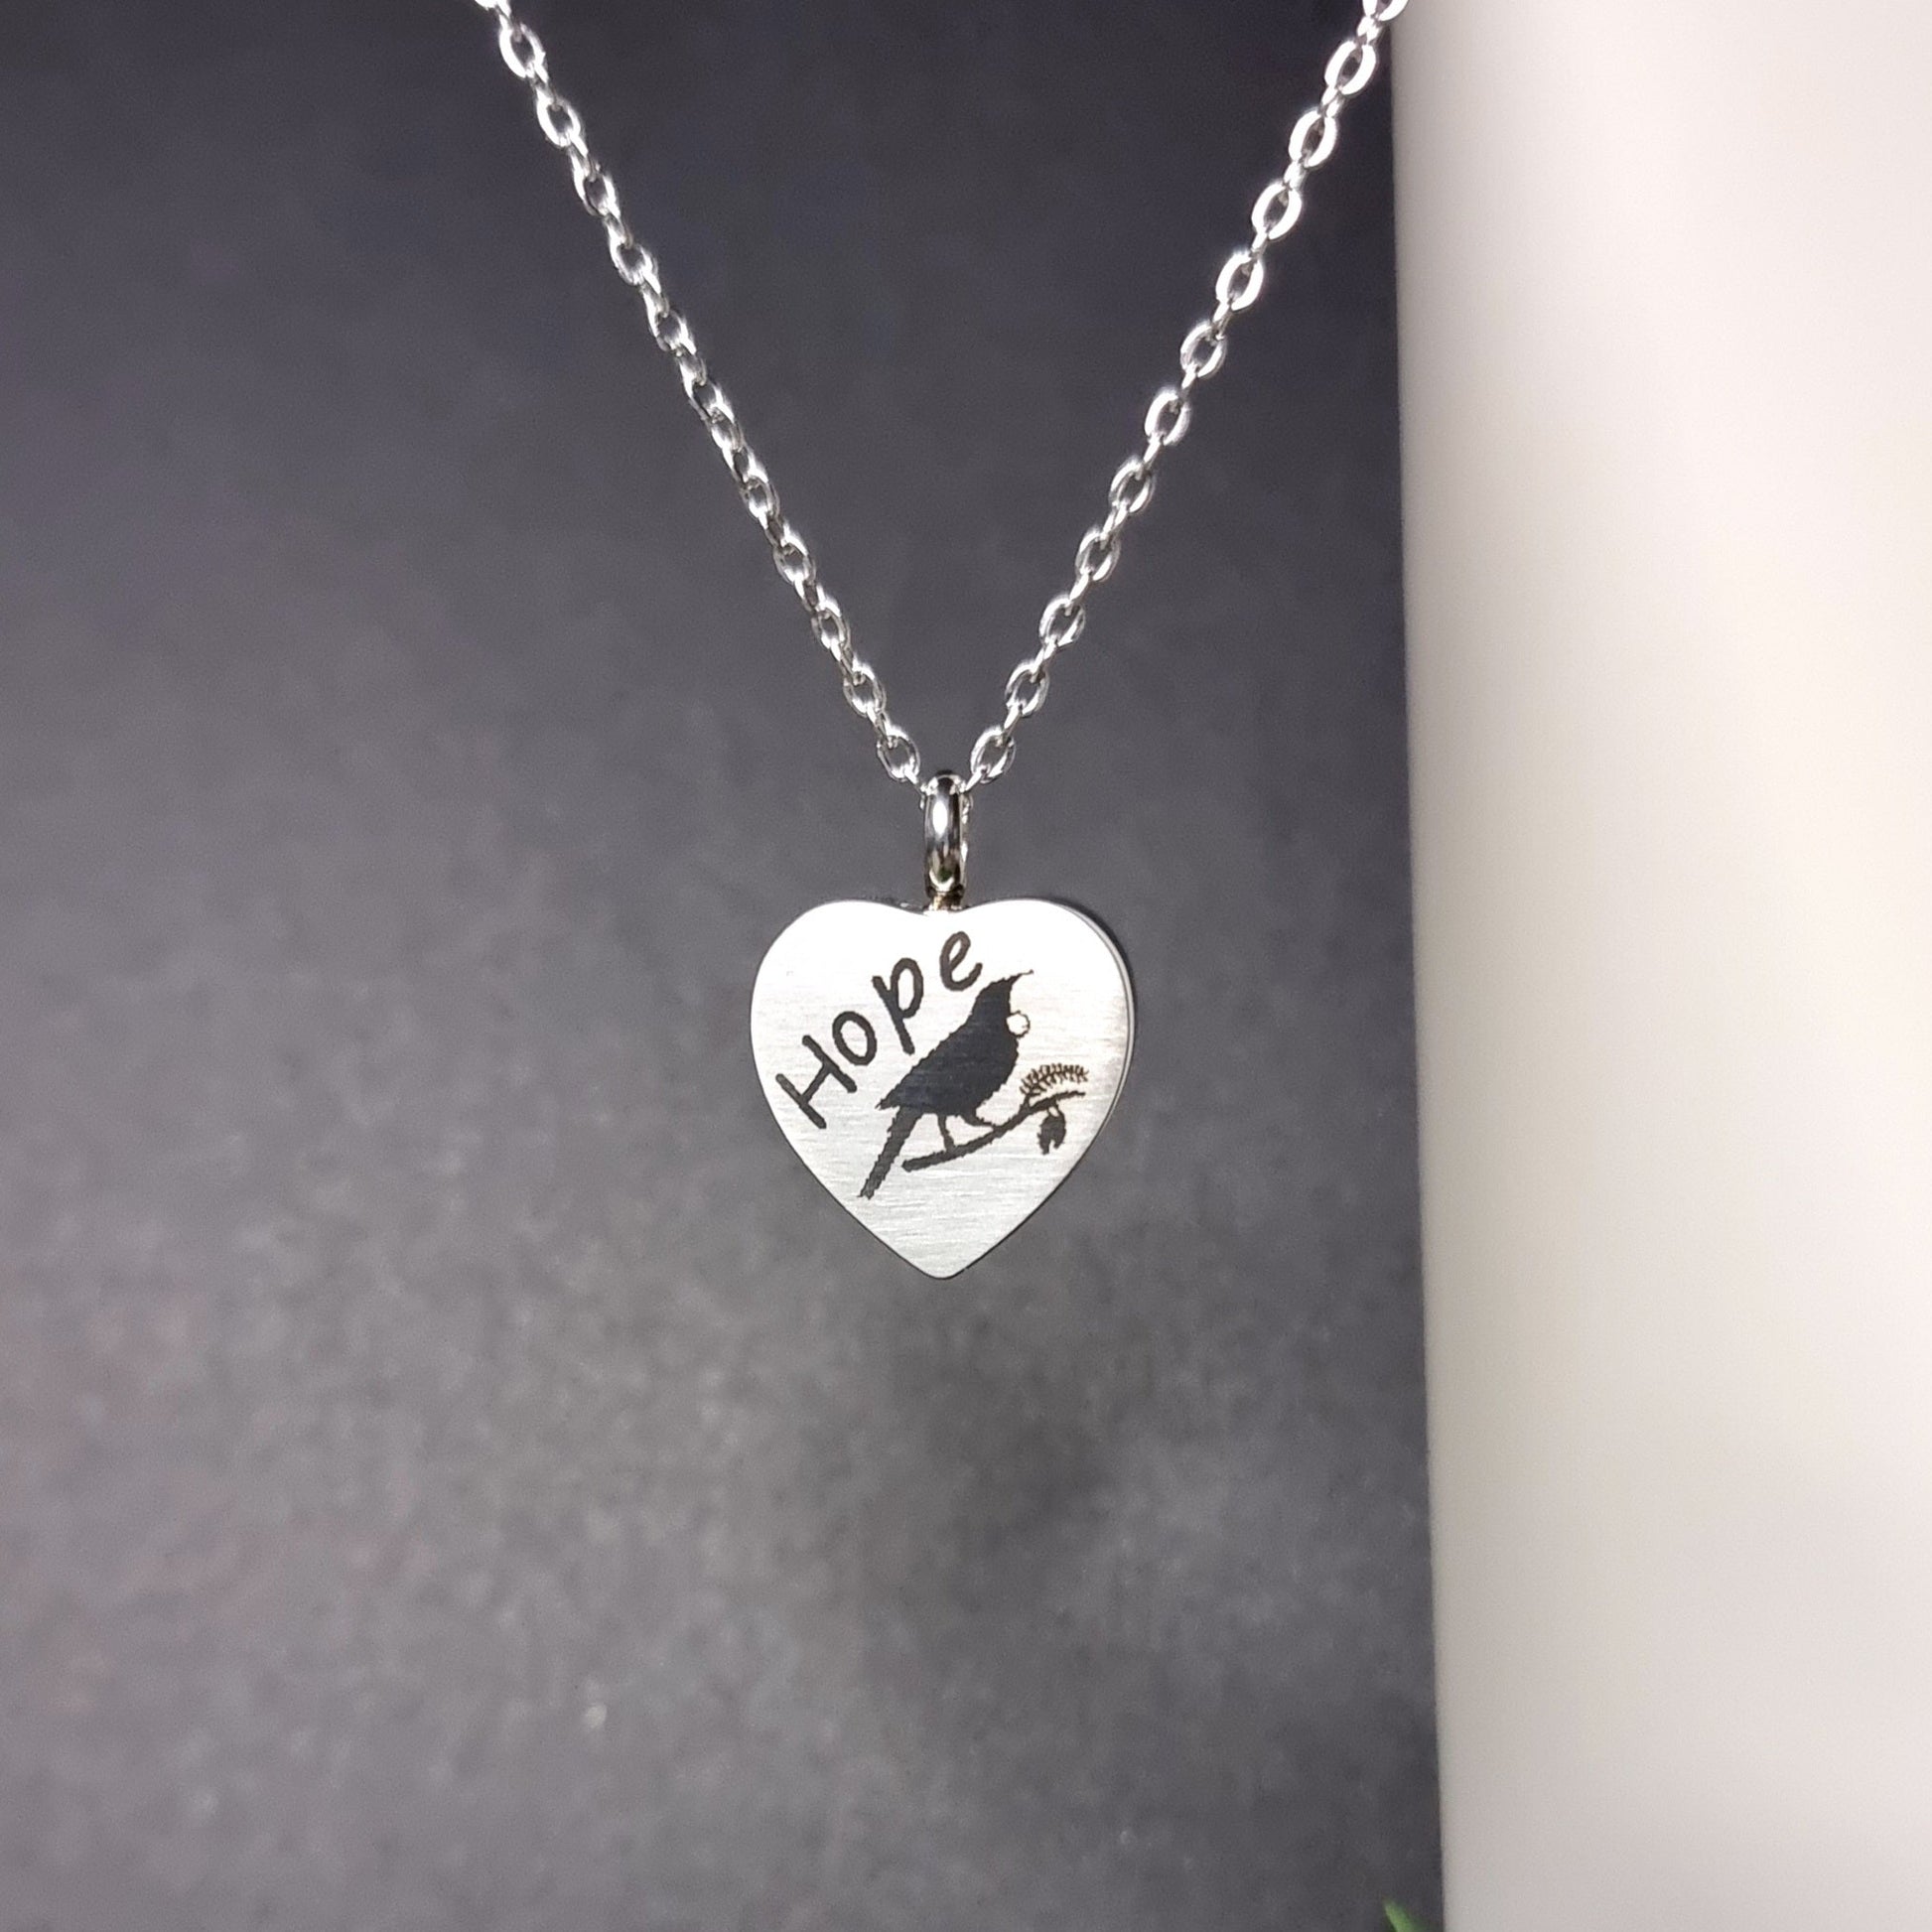 Tui Hope Engraved Keepsake Memorial Necklace Front View